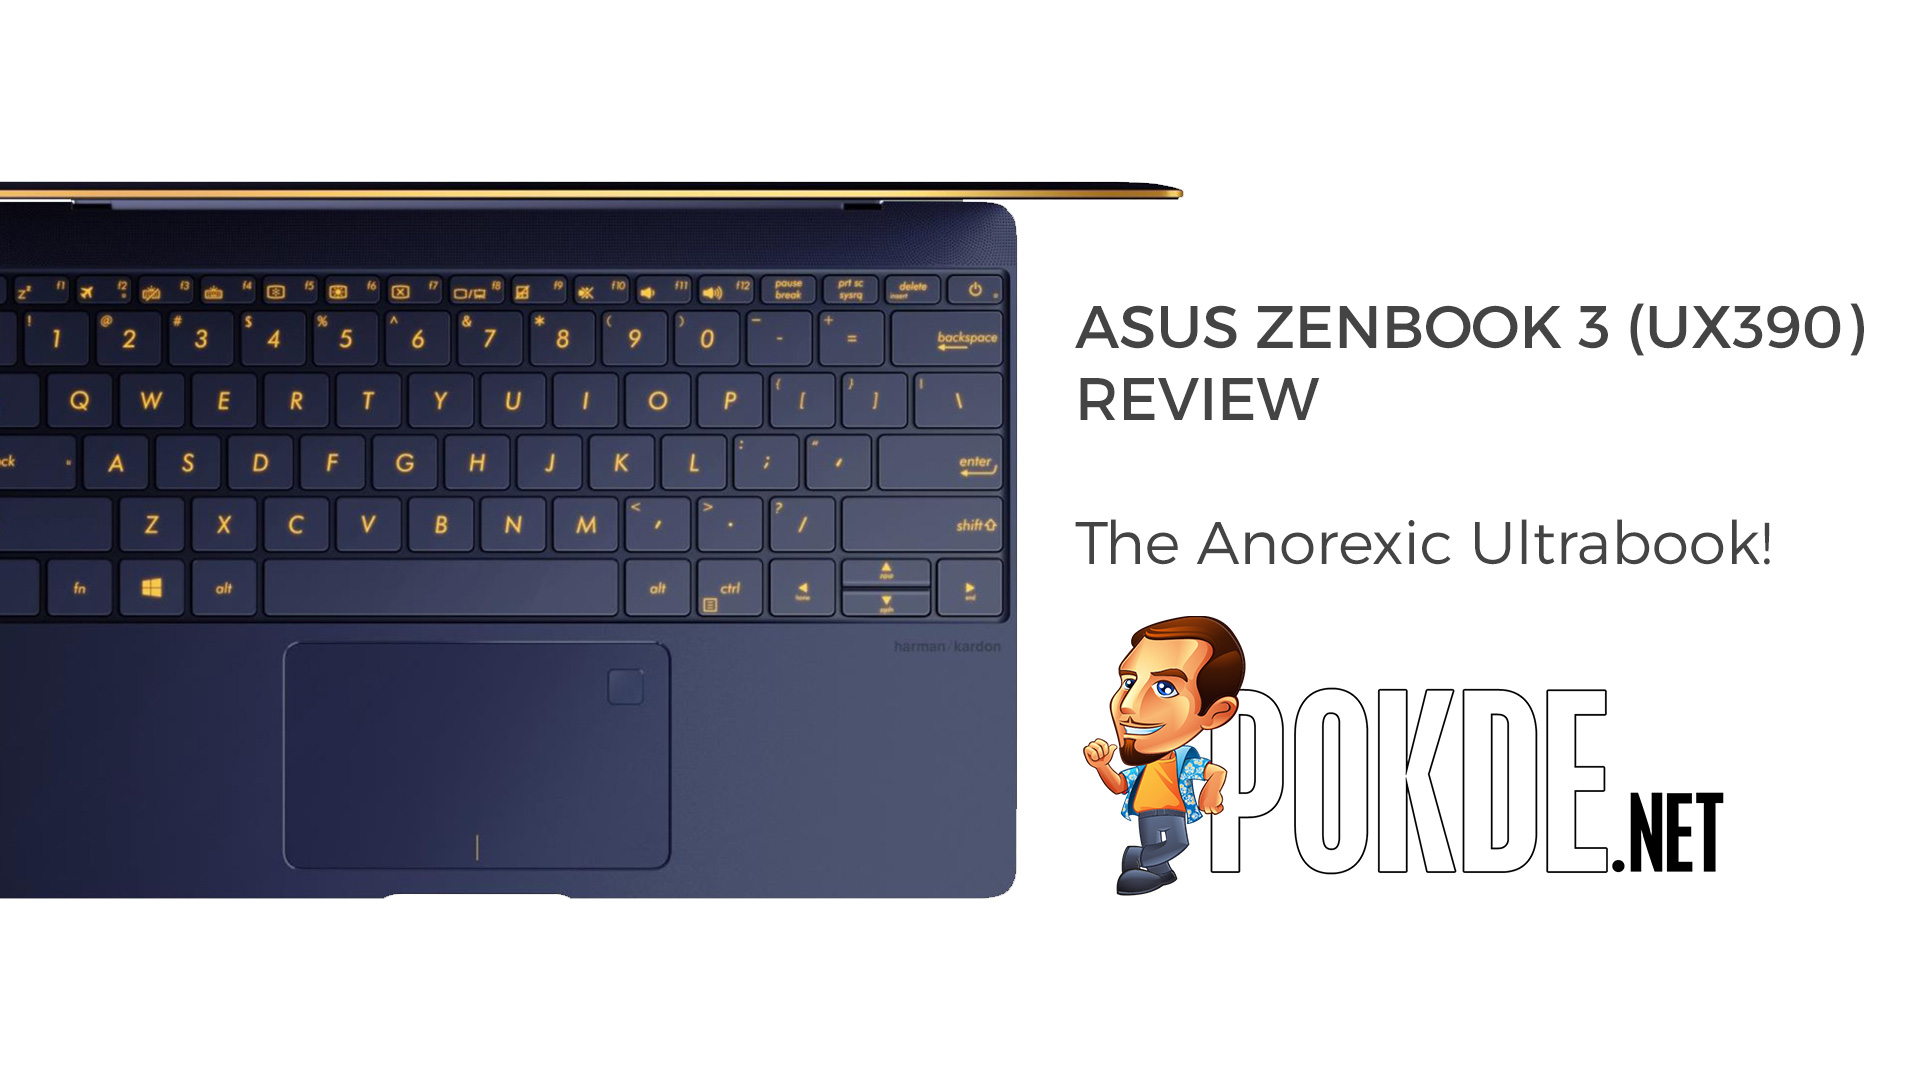 Asus ZenBook 3 (UX390) Review - The Anorexic Ultrabook 35